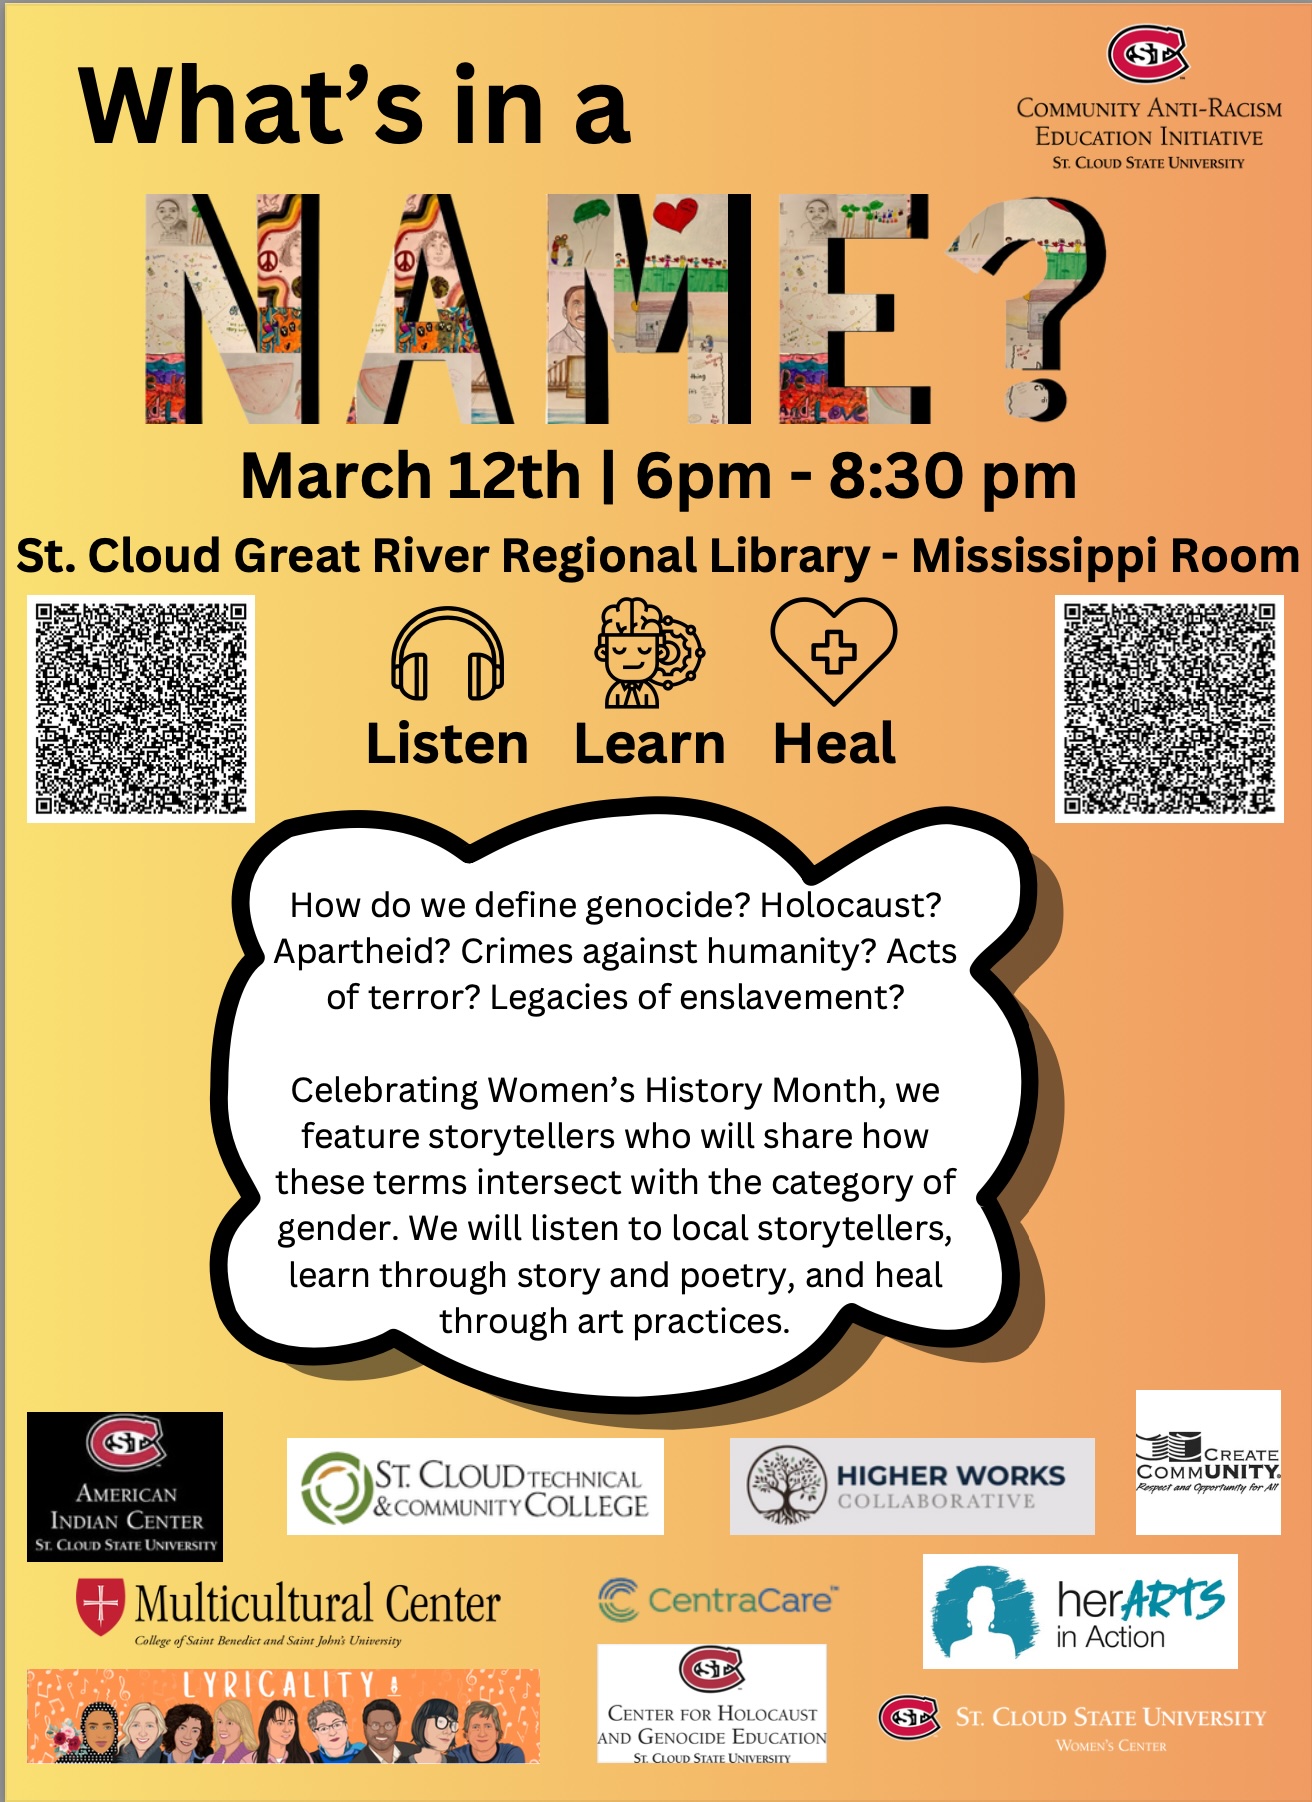 Poster for Event "What's in a Name?" March 12, 2024 6pm - 8:30 pm at St. Cloud Great River Regional Library. Featuring storytellers who will share how the terms "genocide, holocaust, apartheid, crimes agains humanity, acts of terror, and legacies of enslavement" intersect with the category of genres. We will listen to local storytellers, learn through story and poetry, and heal through arts practices.